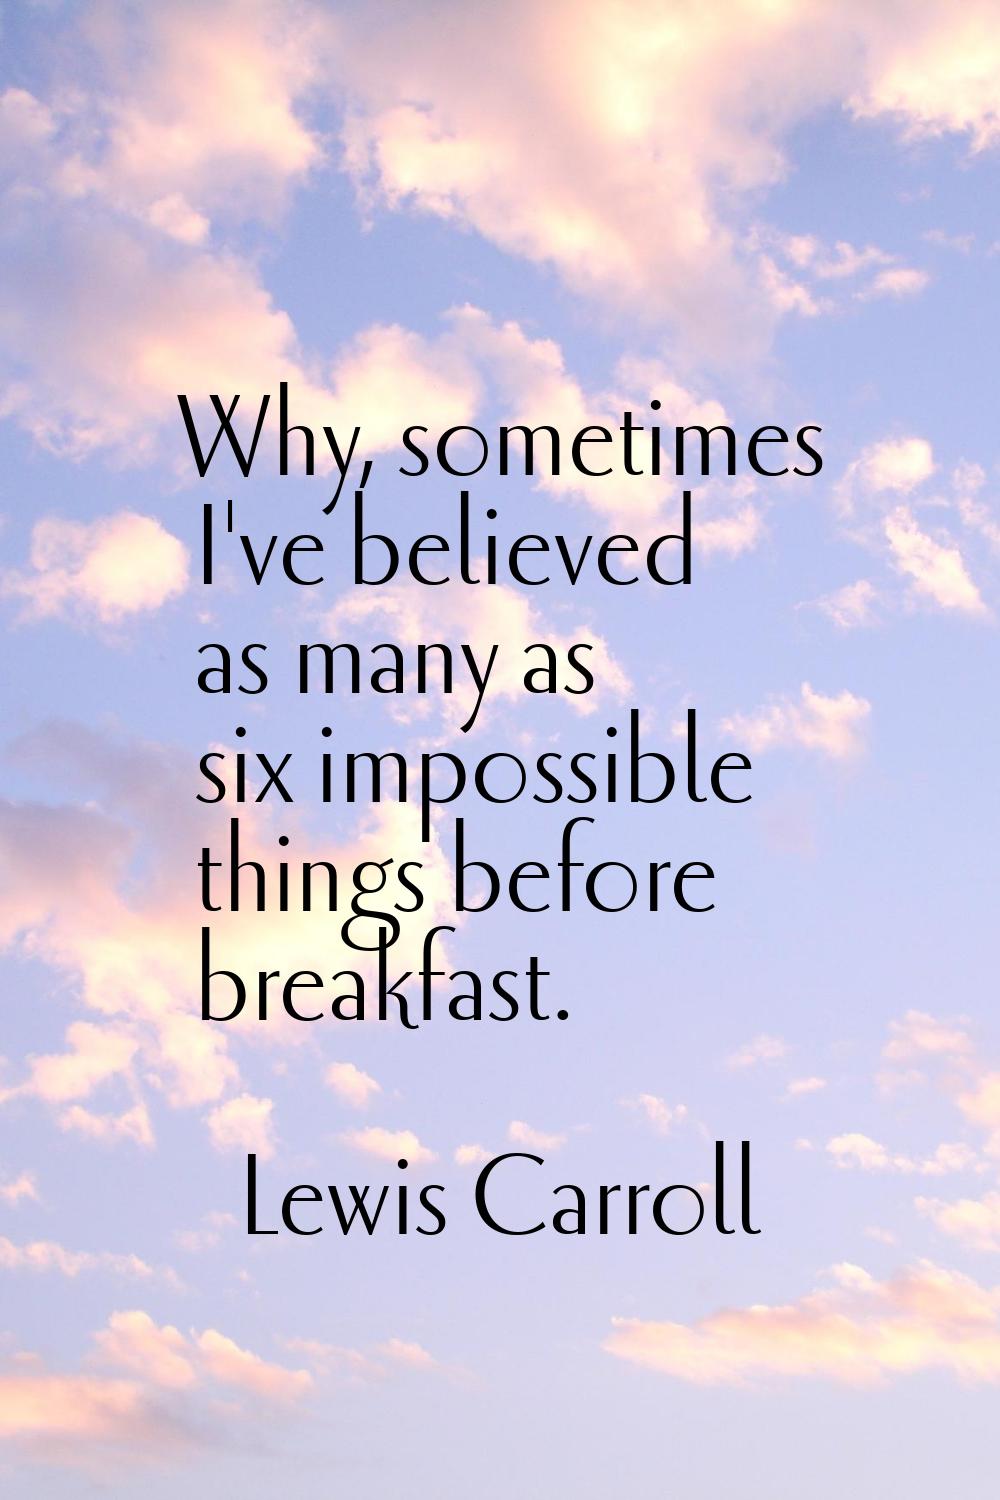 Why, sometimes I've believed as many as six impossible things before breakfast.